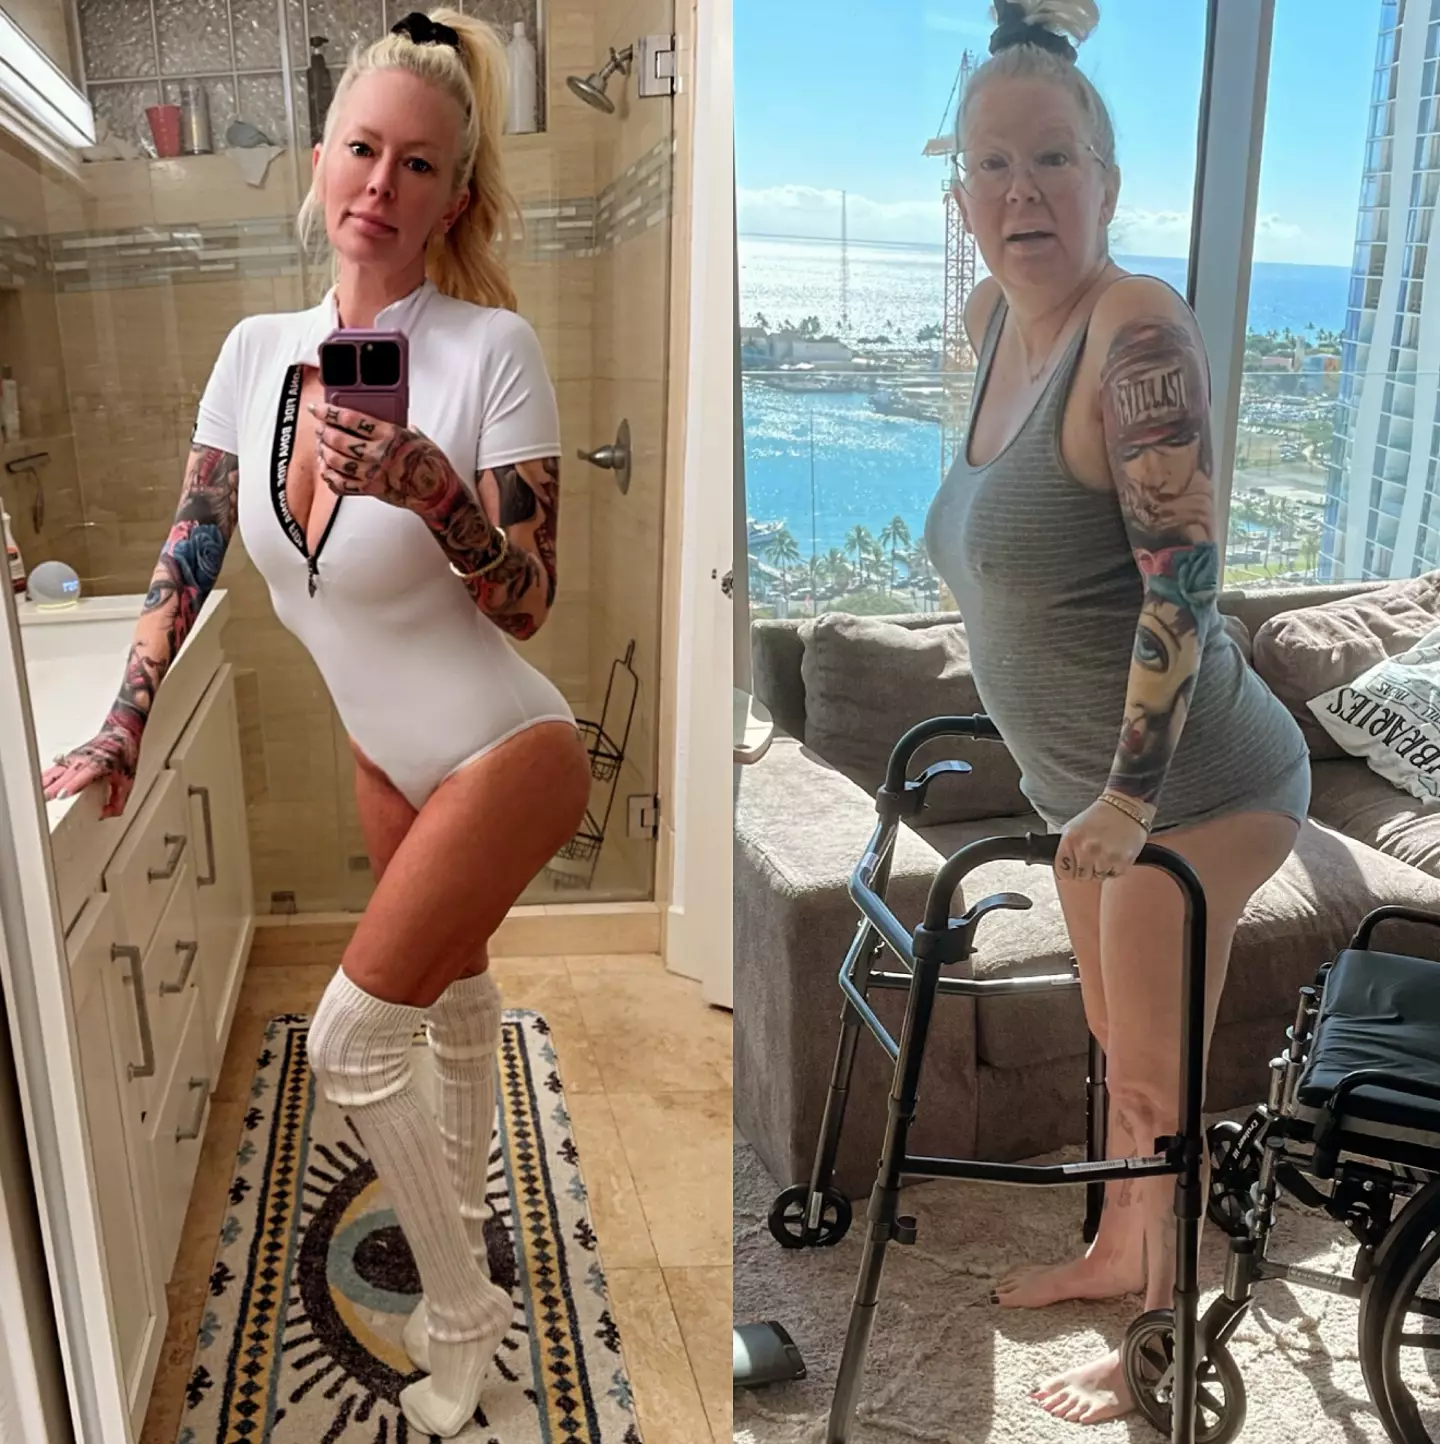 Jameson shared some progress pictures to her social media.